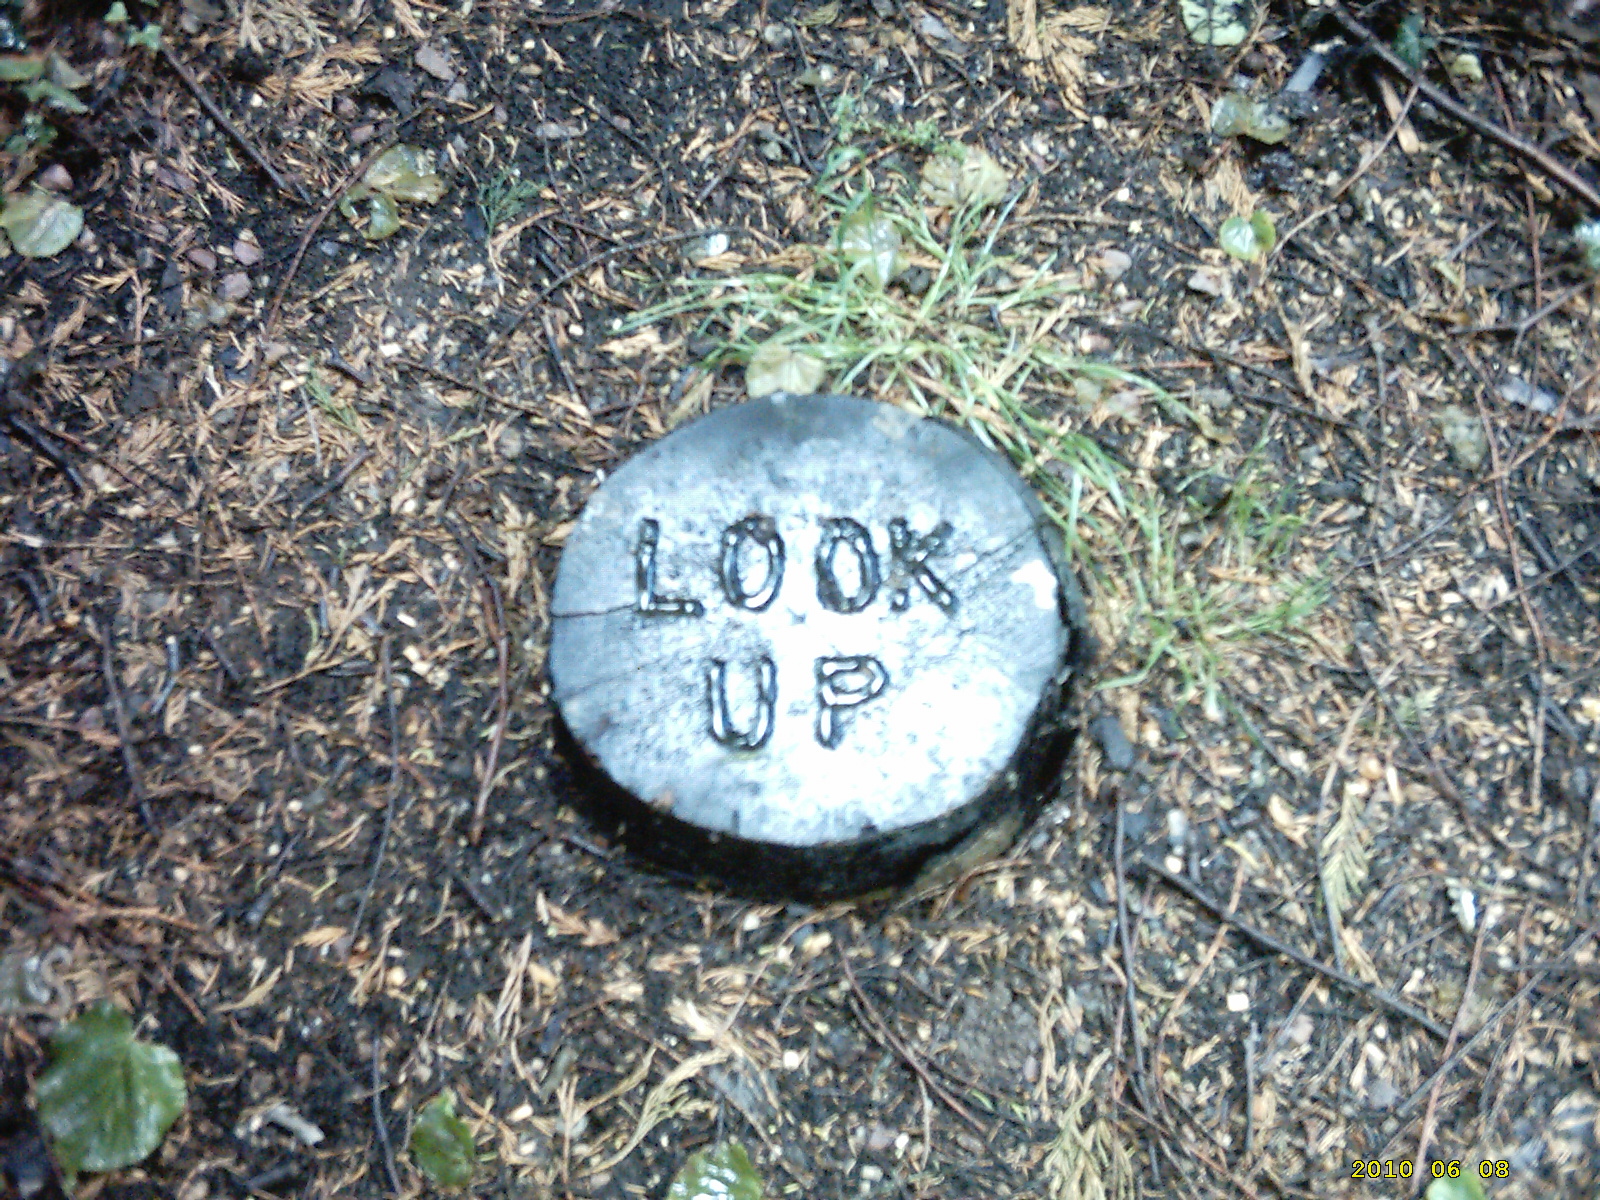 Tree stump with words 'Look up' carved into it